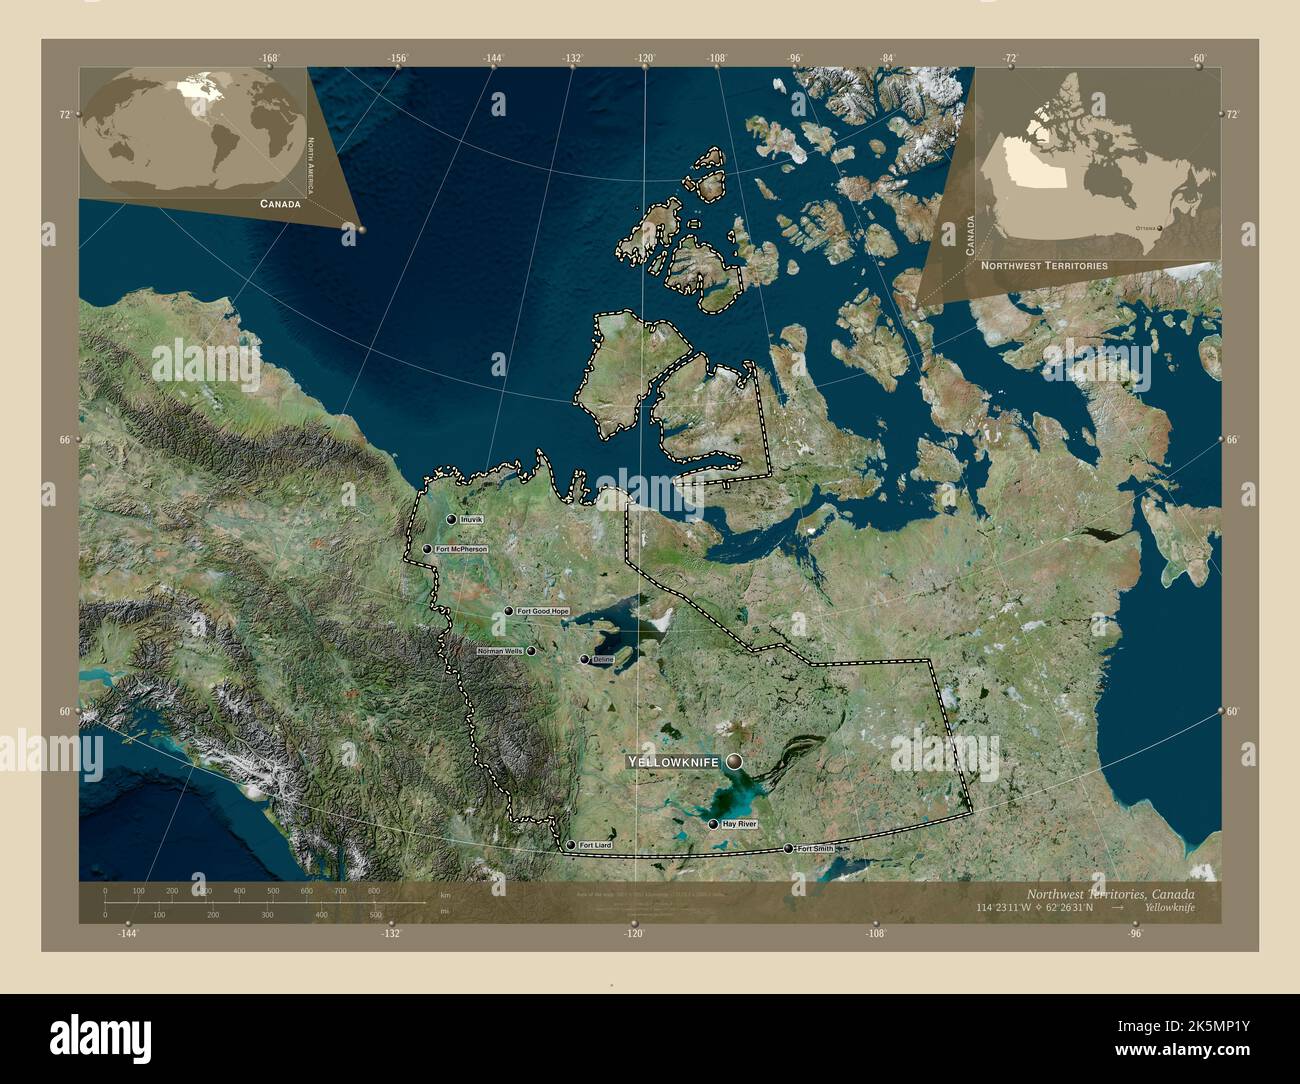 Northwest Territories Territory Of Canada High Resolution Satellite Map Locations And Names Of Major Cities Of The Region Corner Auxiliary Locatio 2K5MP1Y 